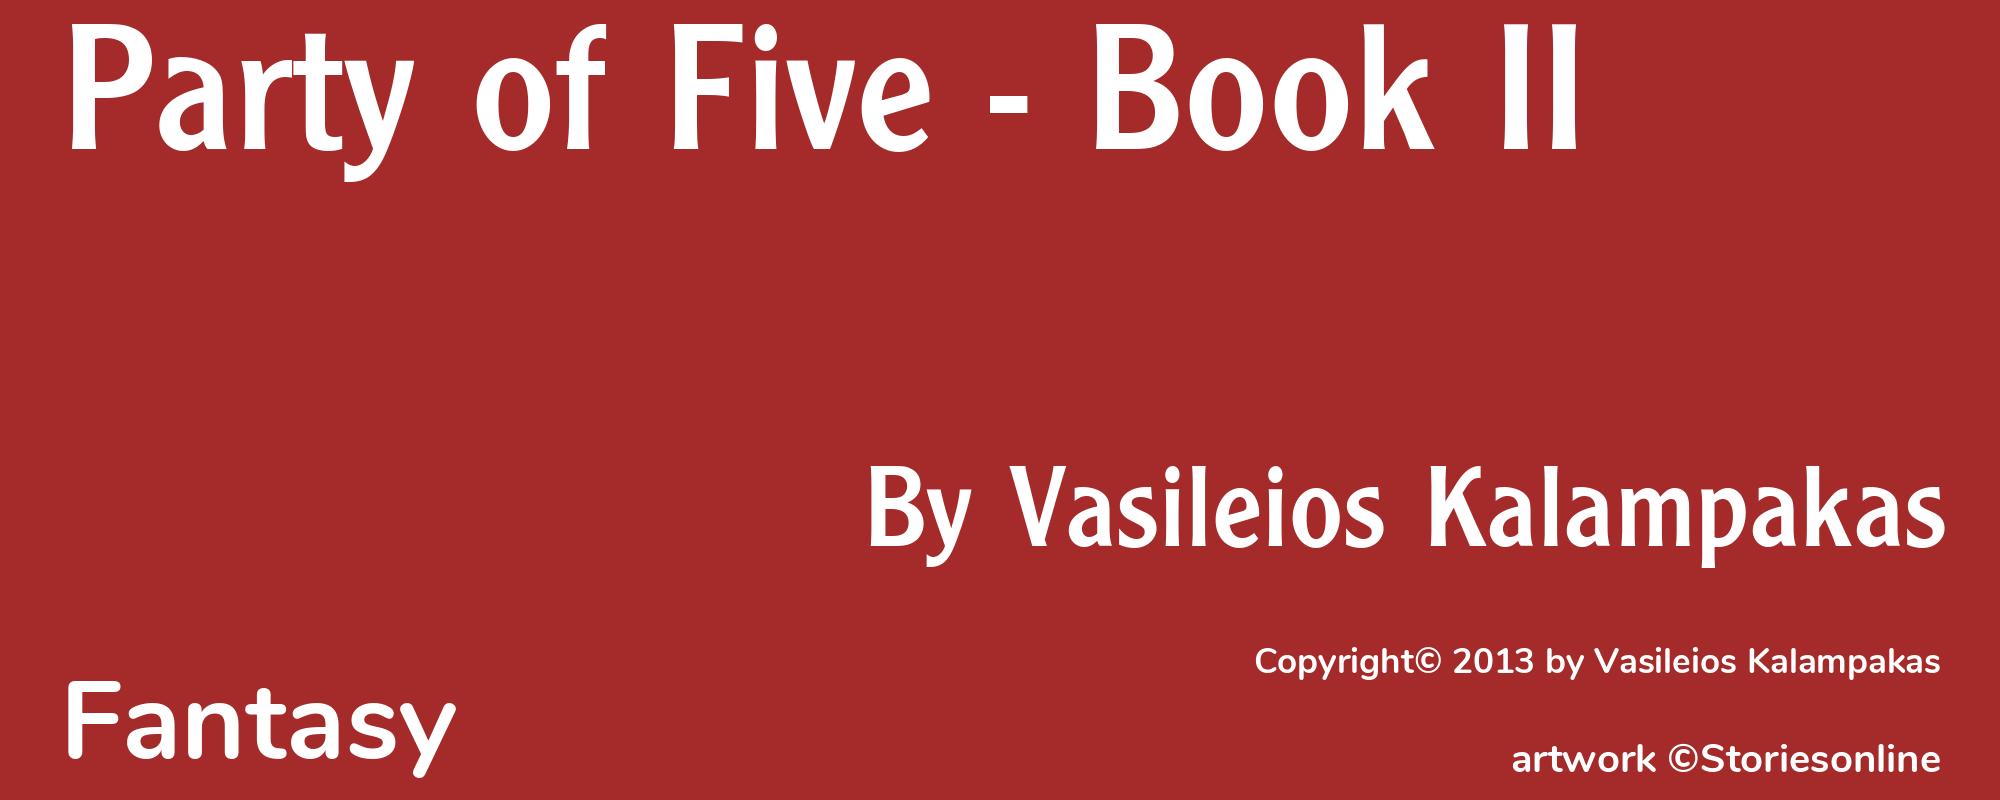 Party of Five - Book II - Cover